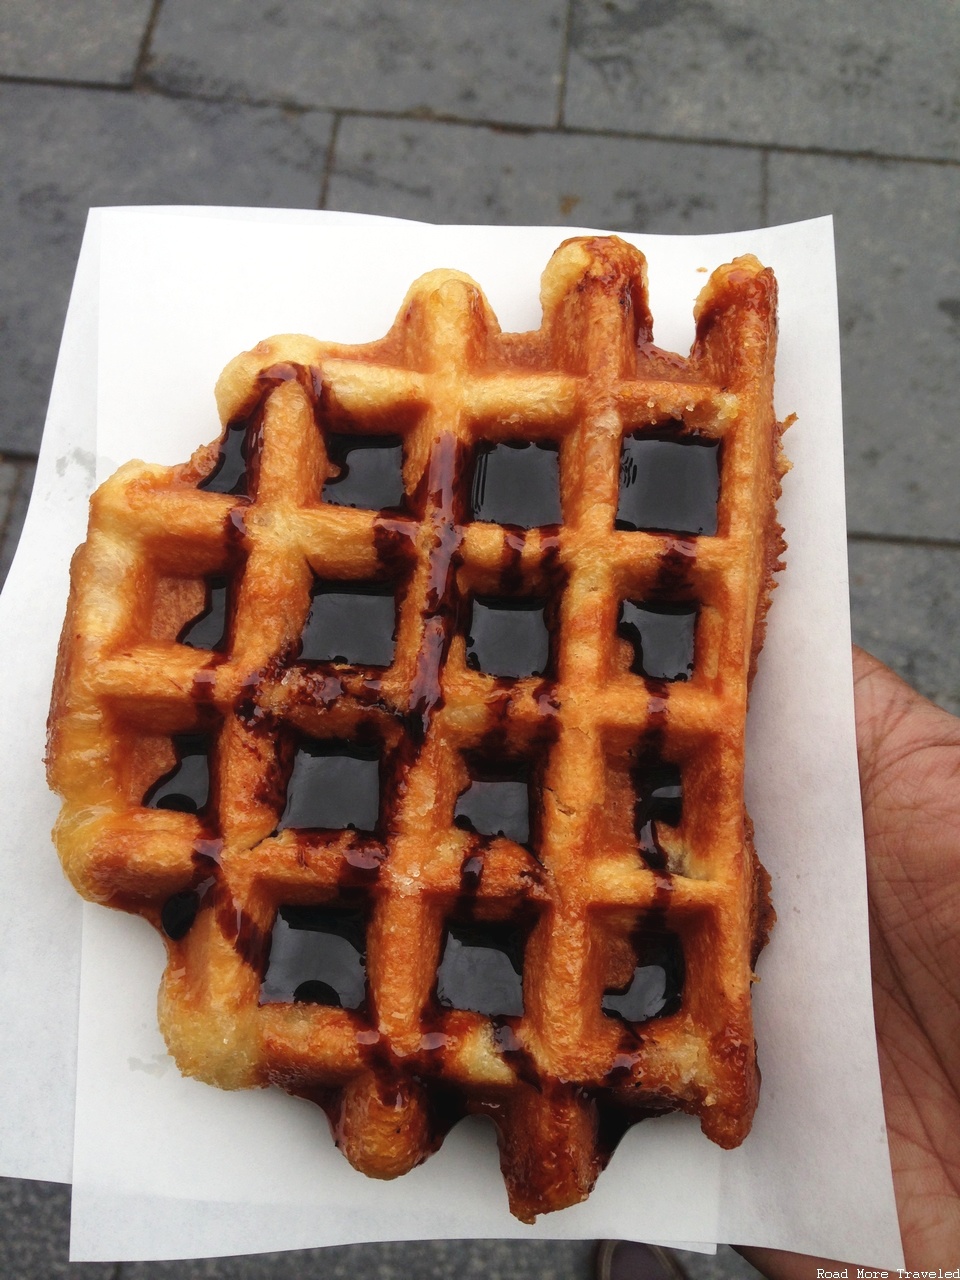 Liege Waffle from a street vendor